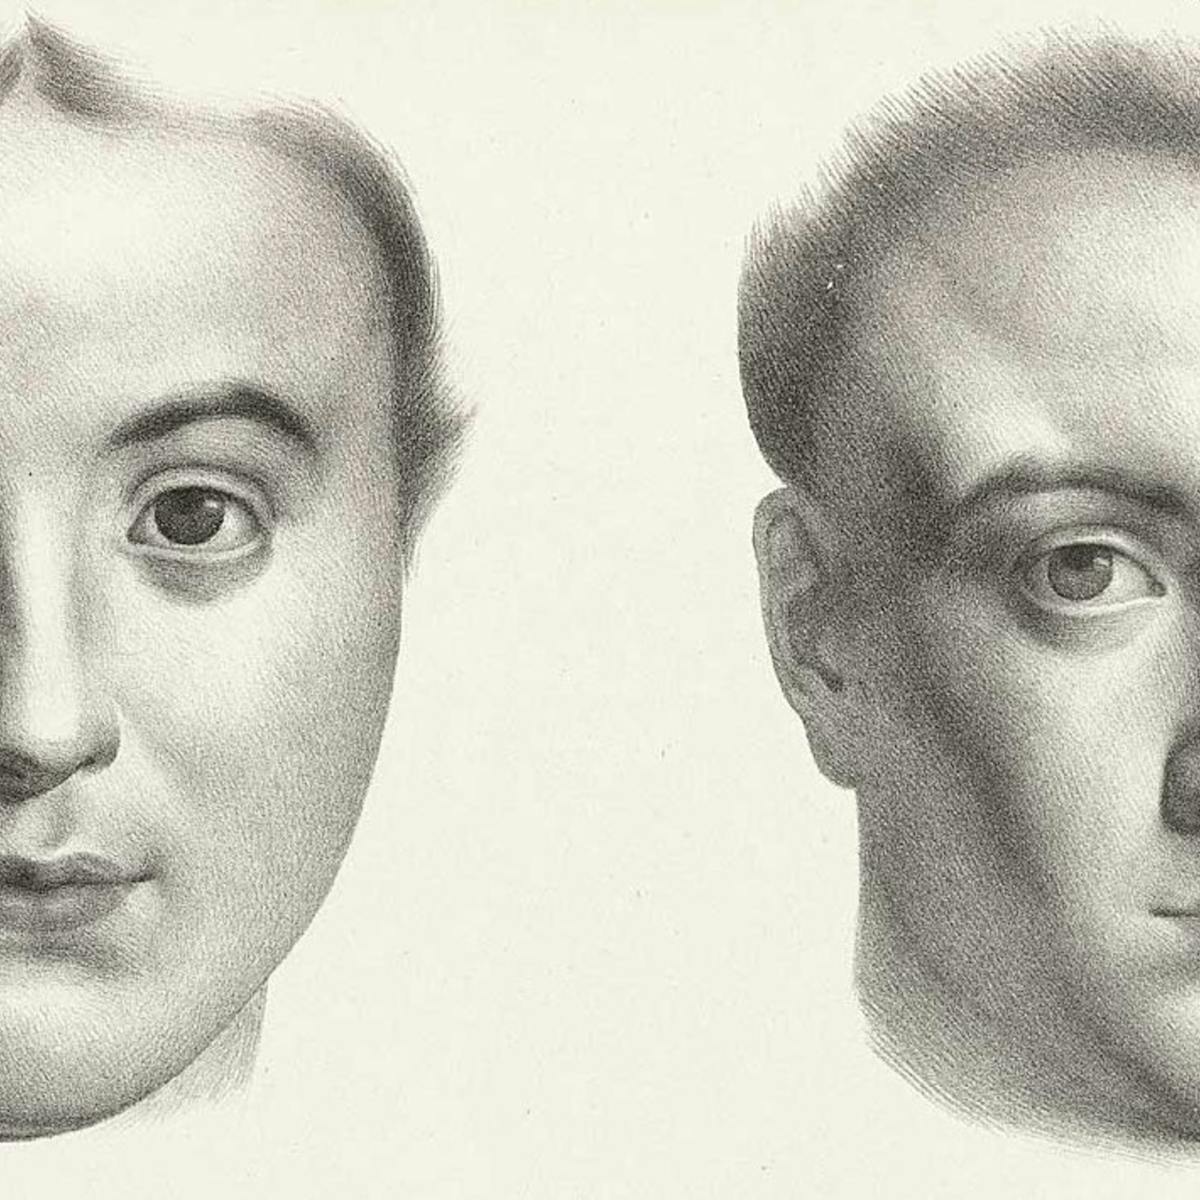 Black and white engraving of two women’s differently shaped heads.